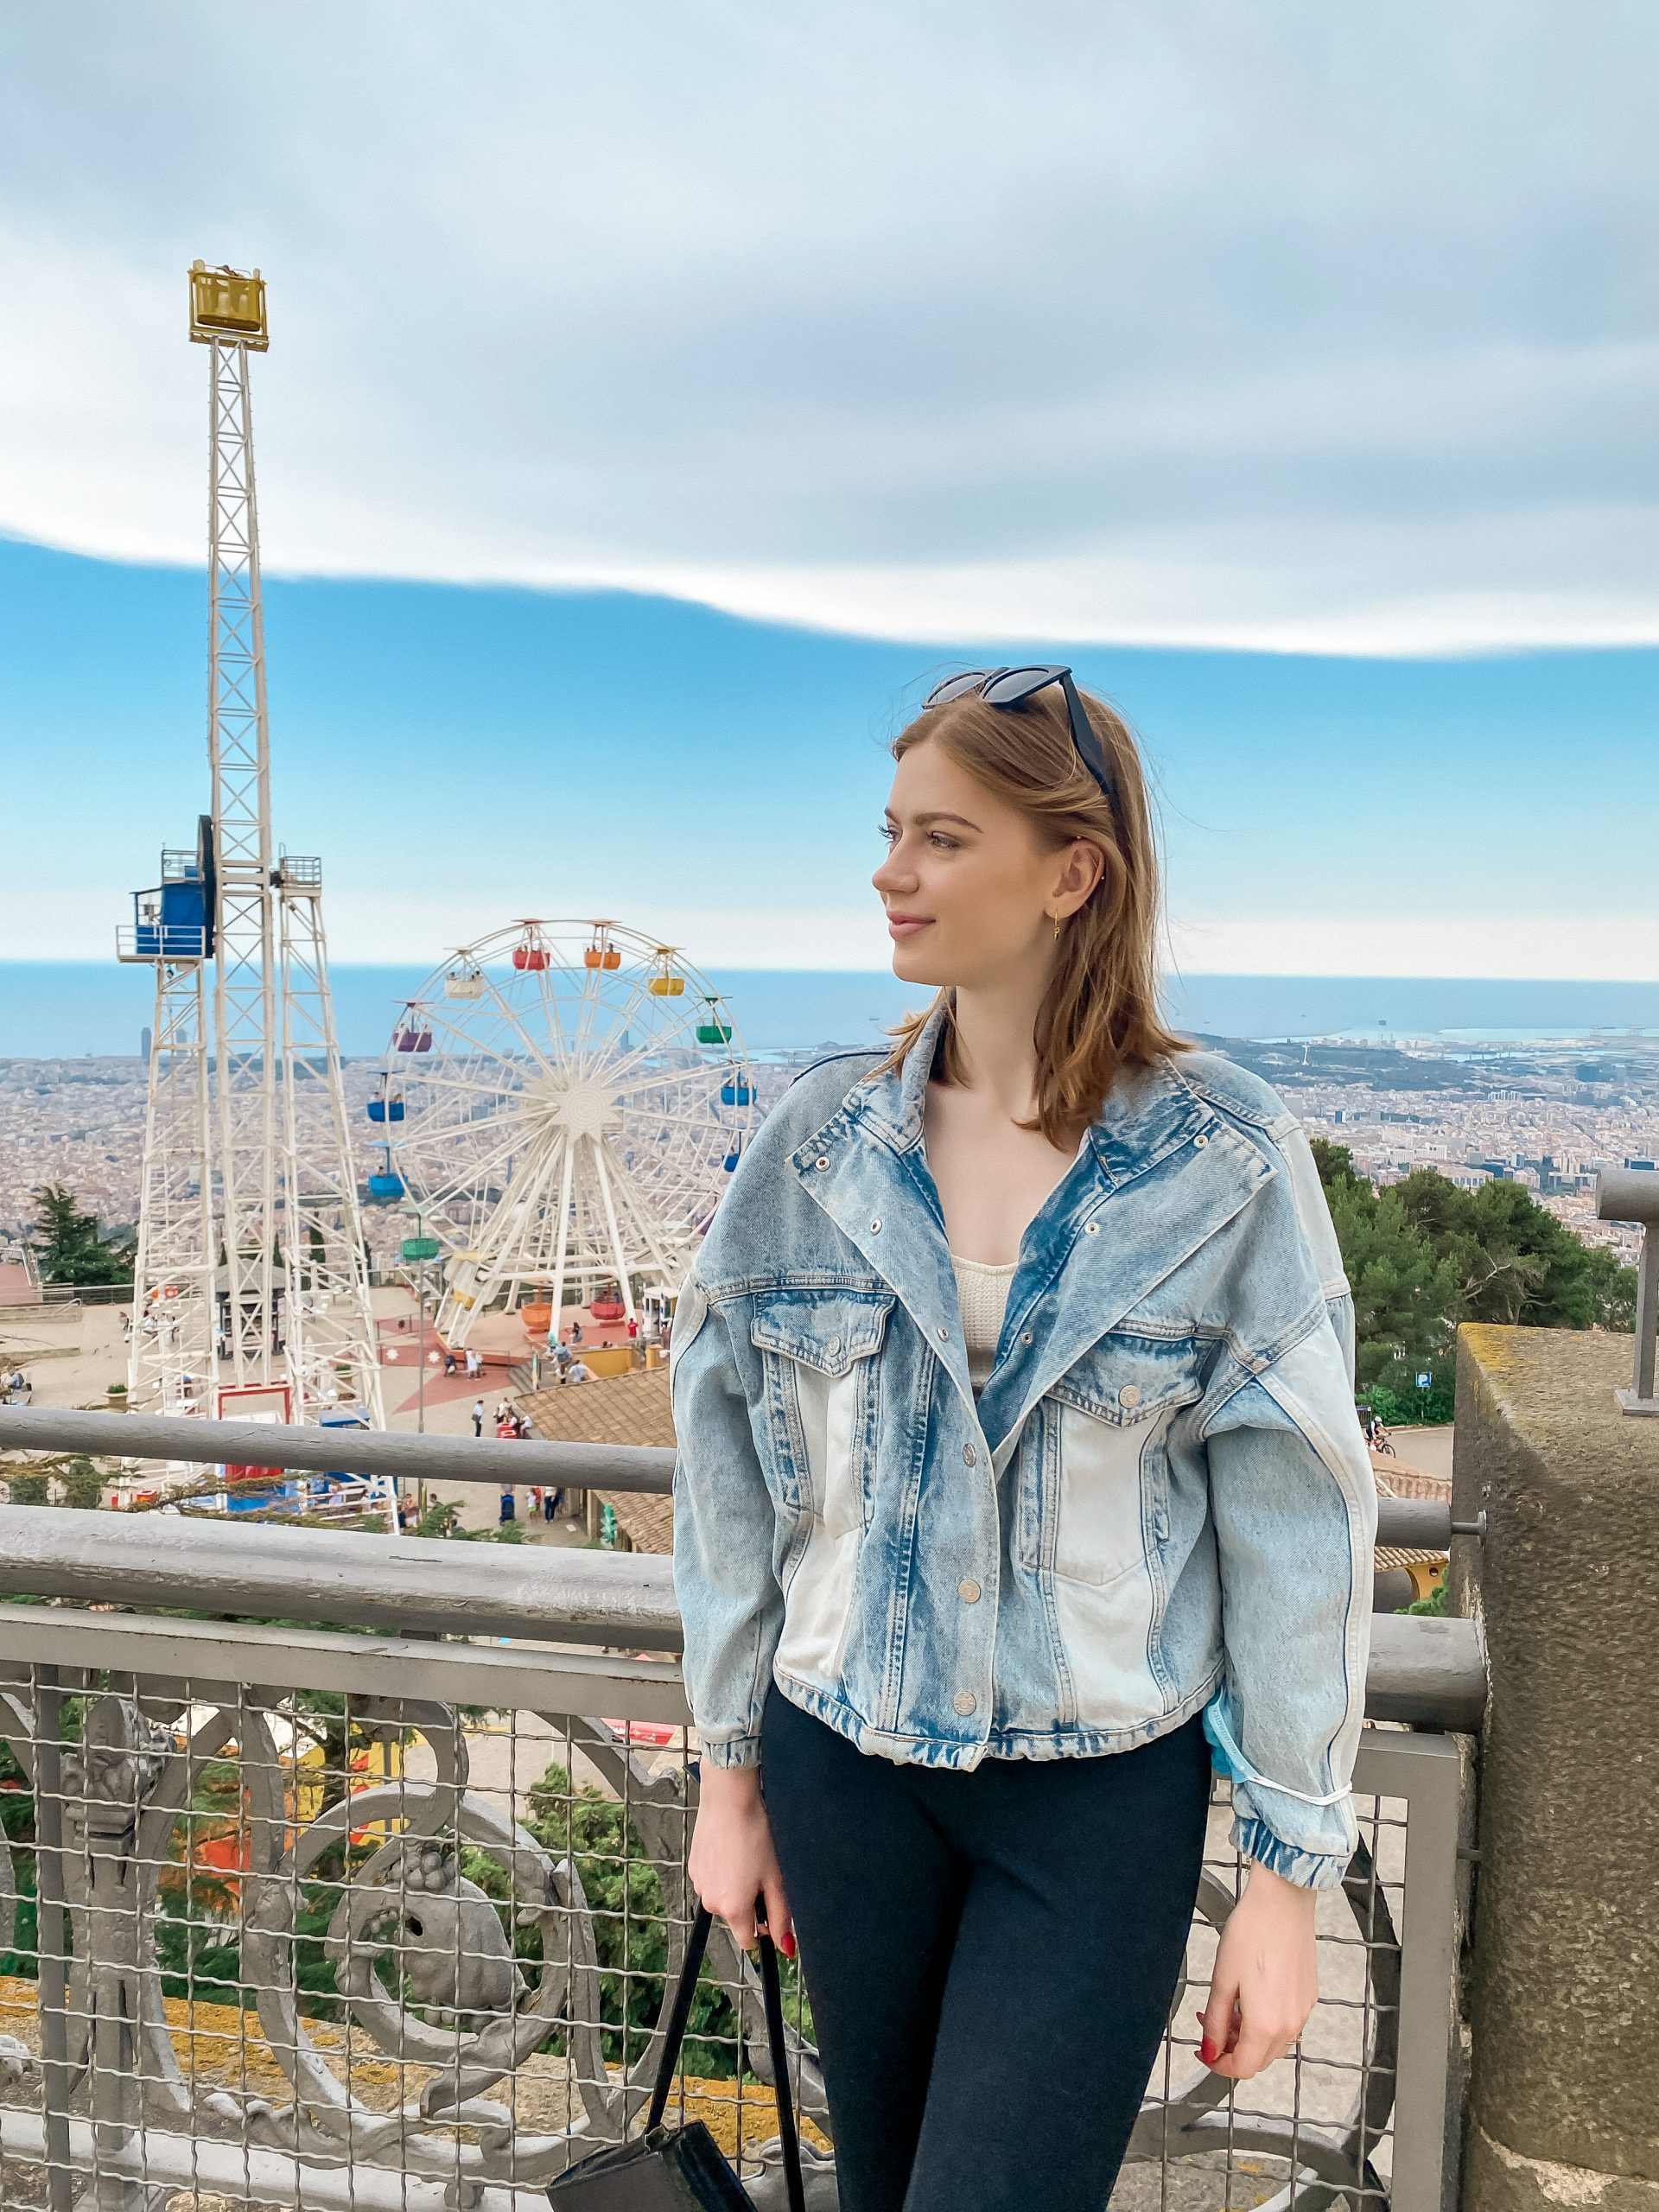 fun facts about barcelona Mount Tibidabo travel guide